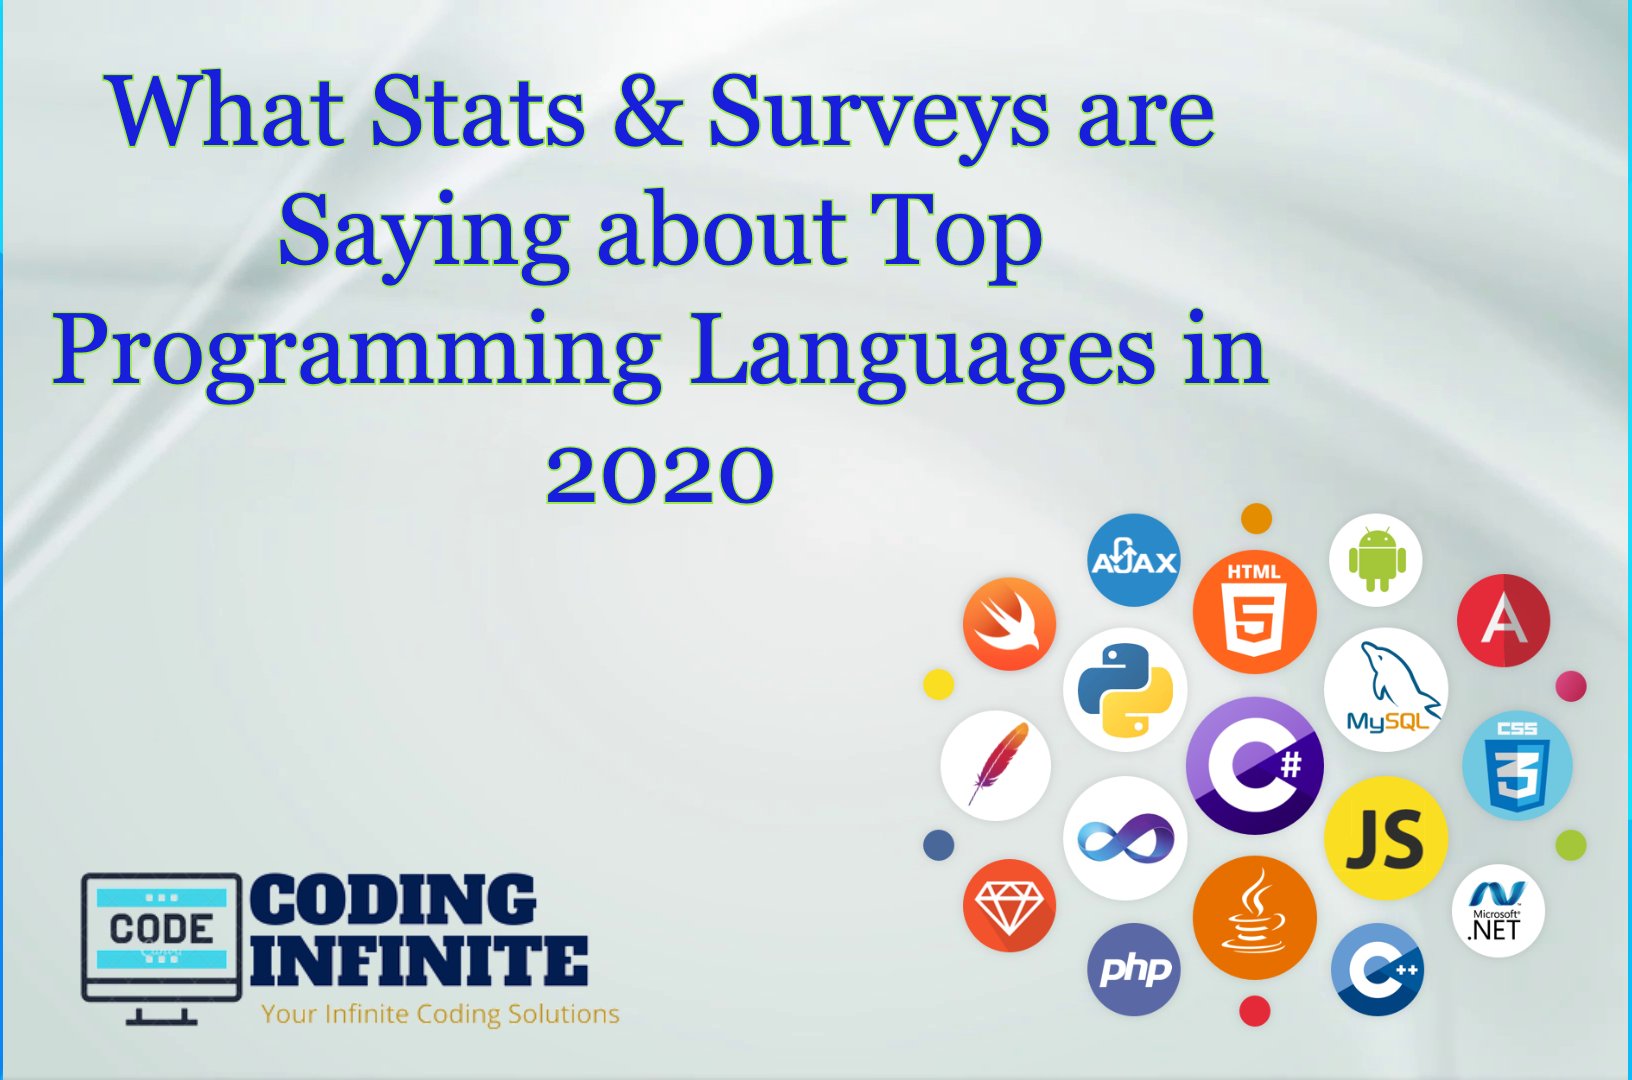 What Stats & Surveys are Saying about Top Programming Languages in 2020